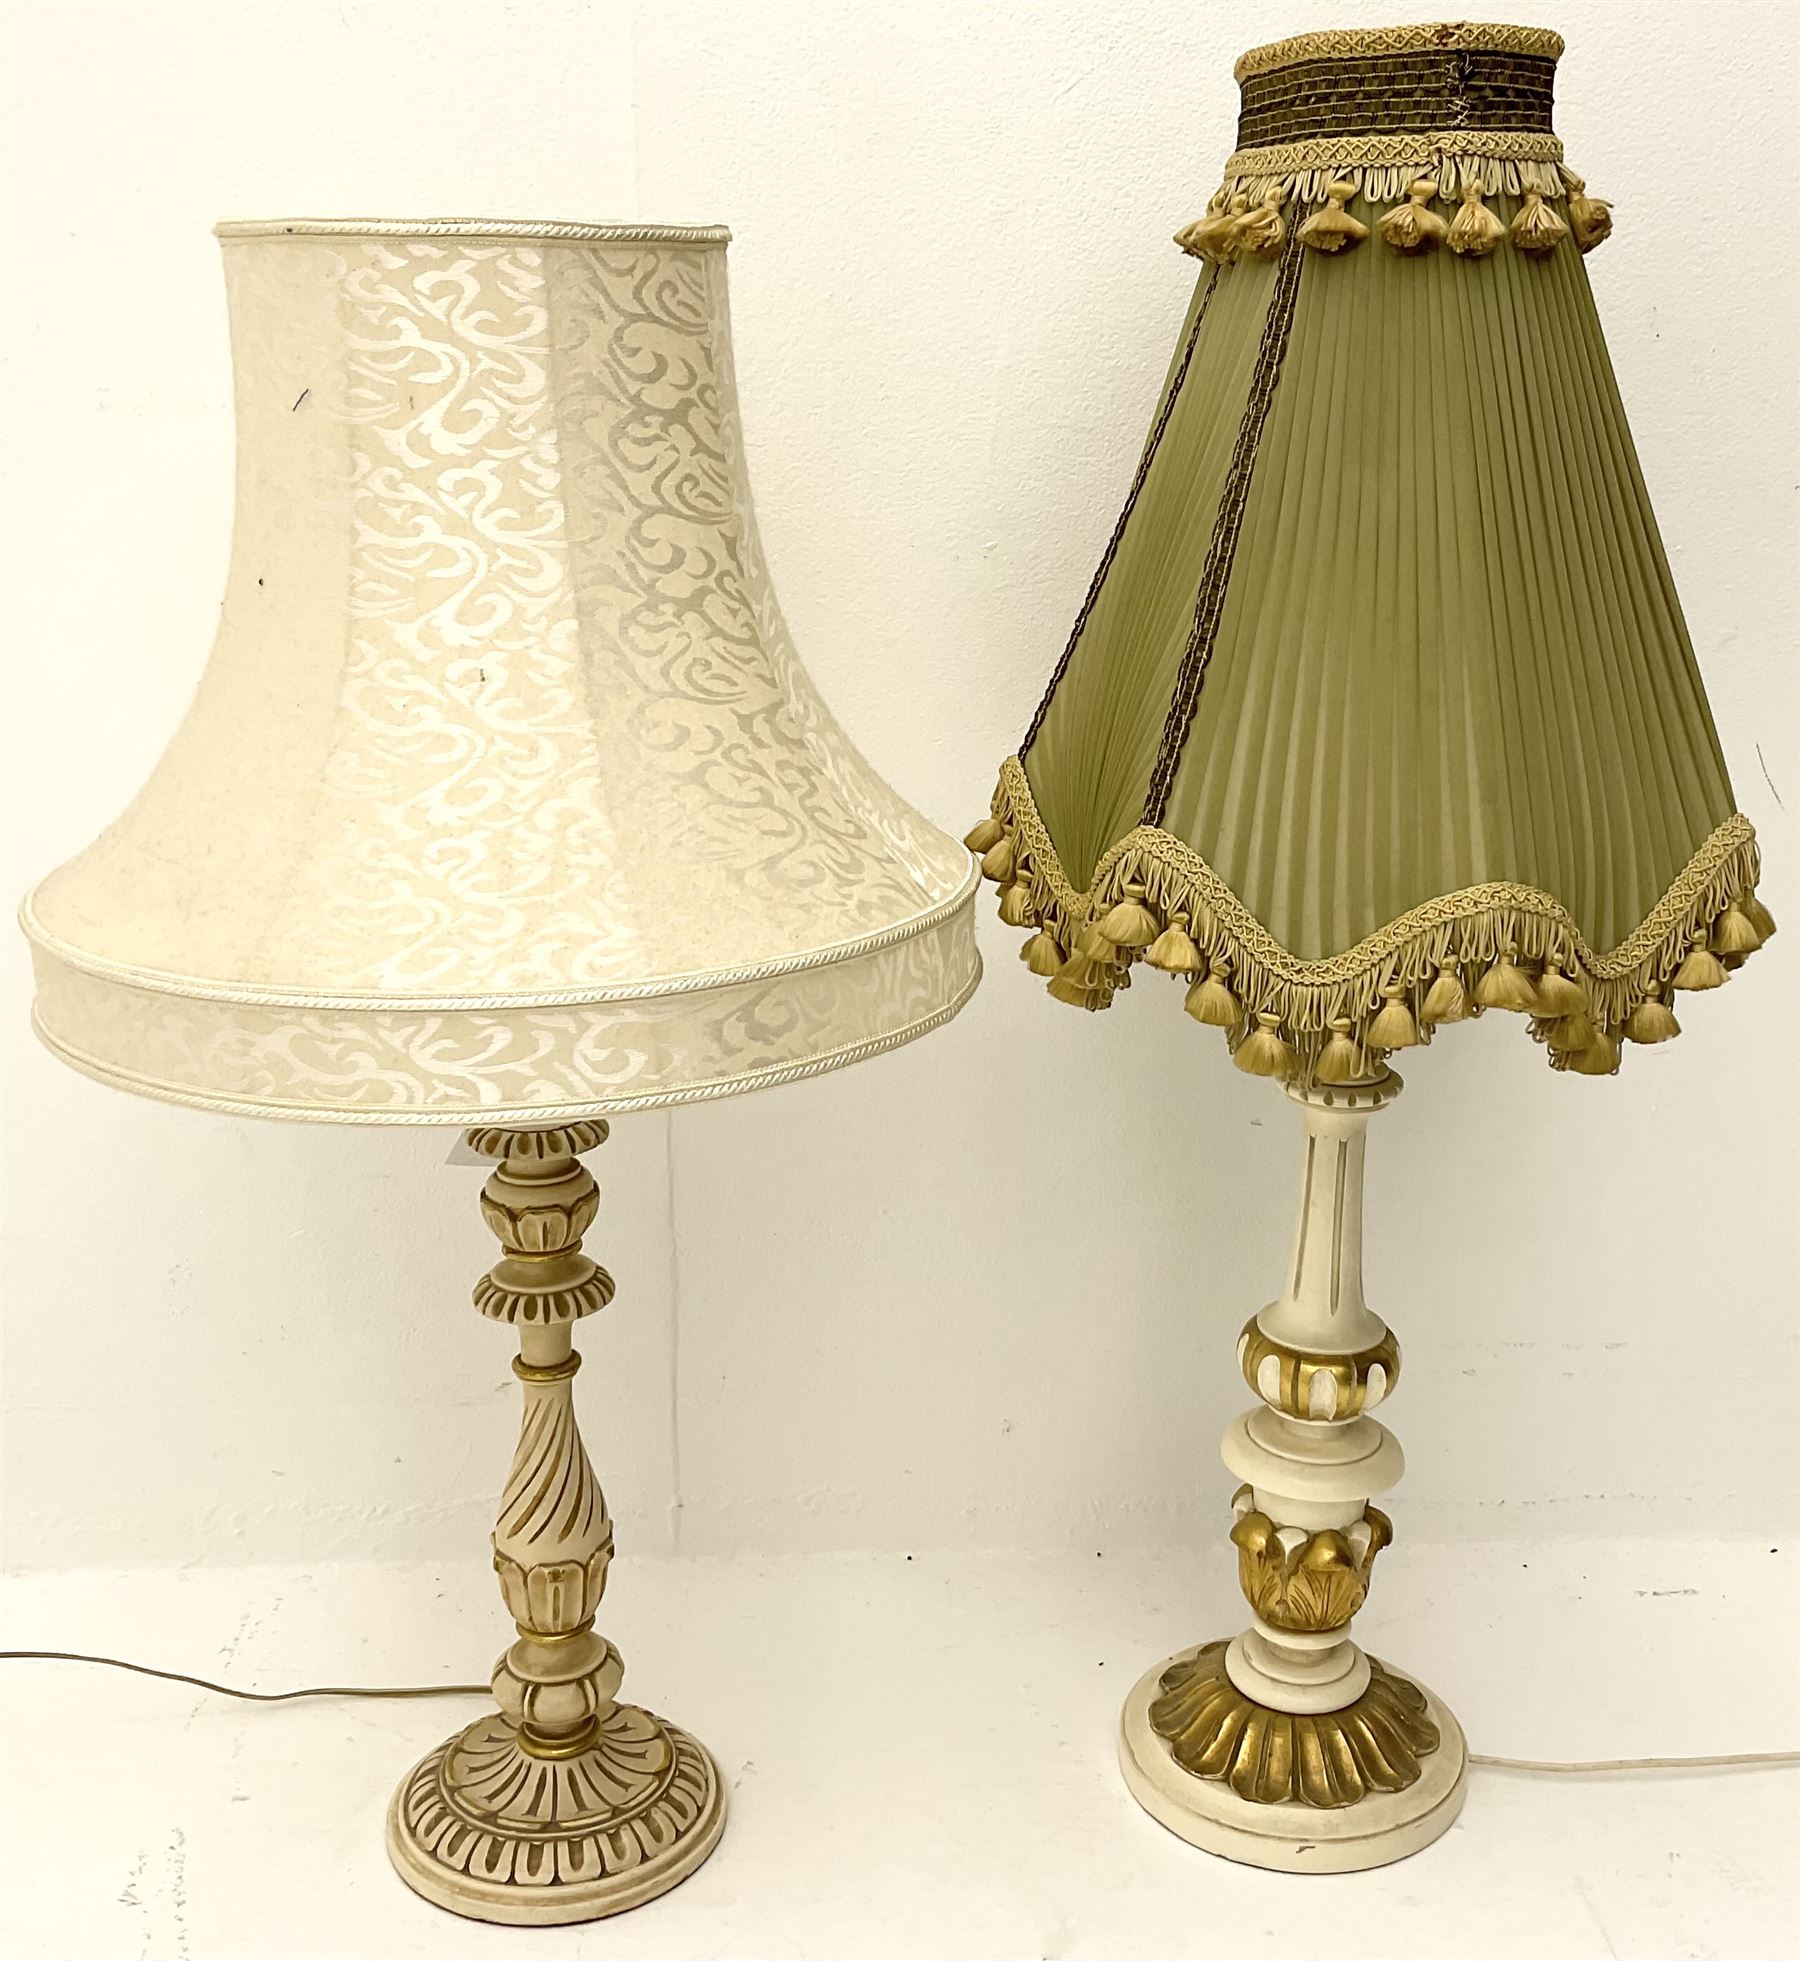 A cream and gilt finished table lamp